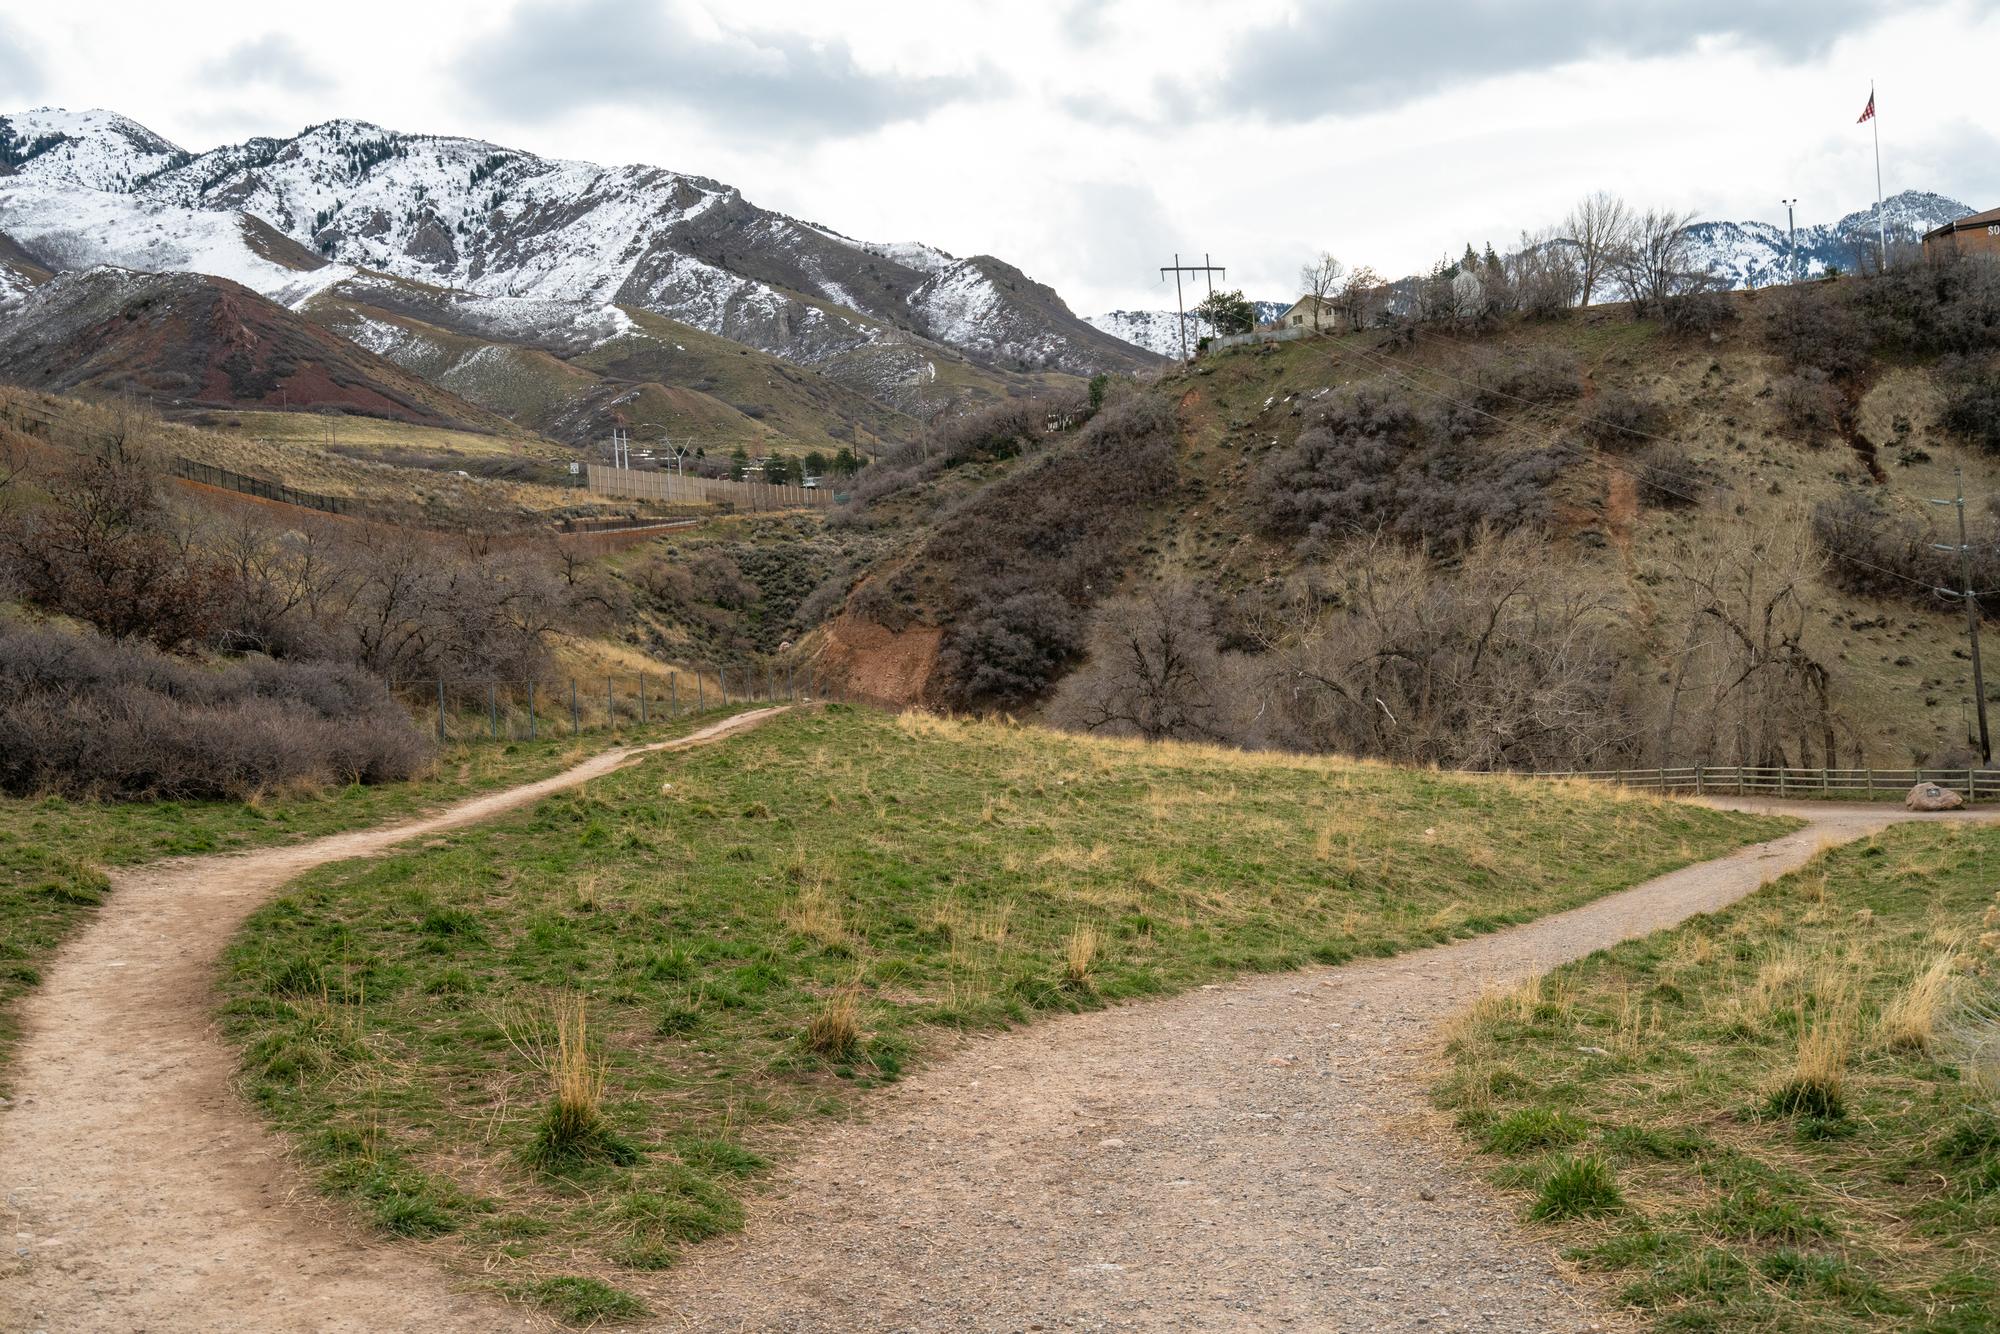 View of Parley's Historic Nature Park trails with Wasatch Mountains in the background